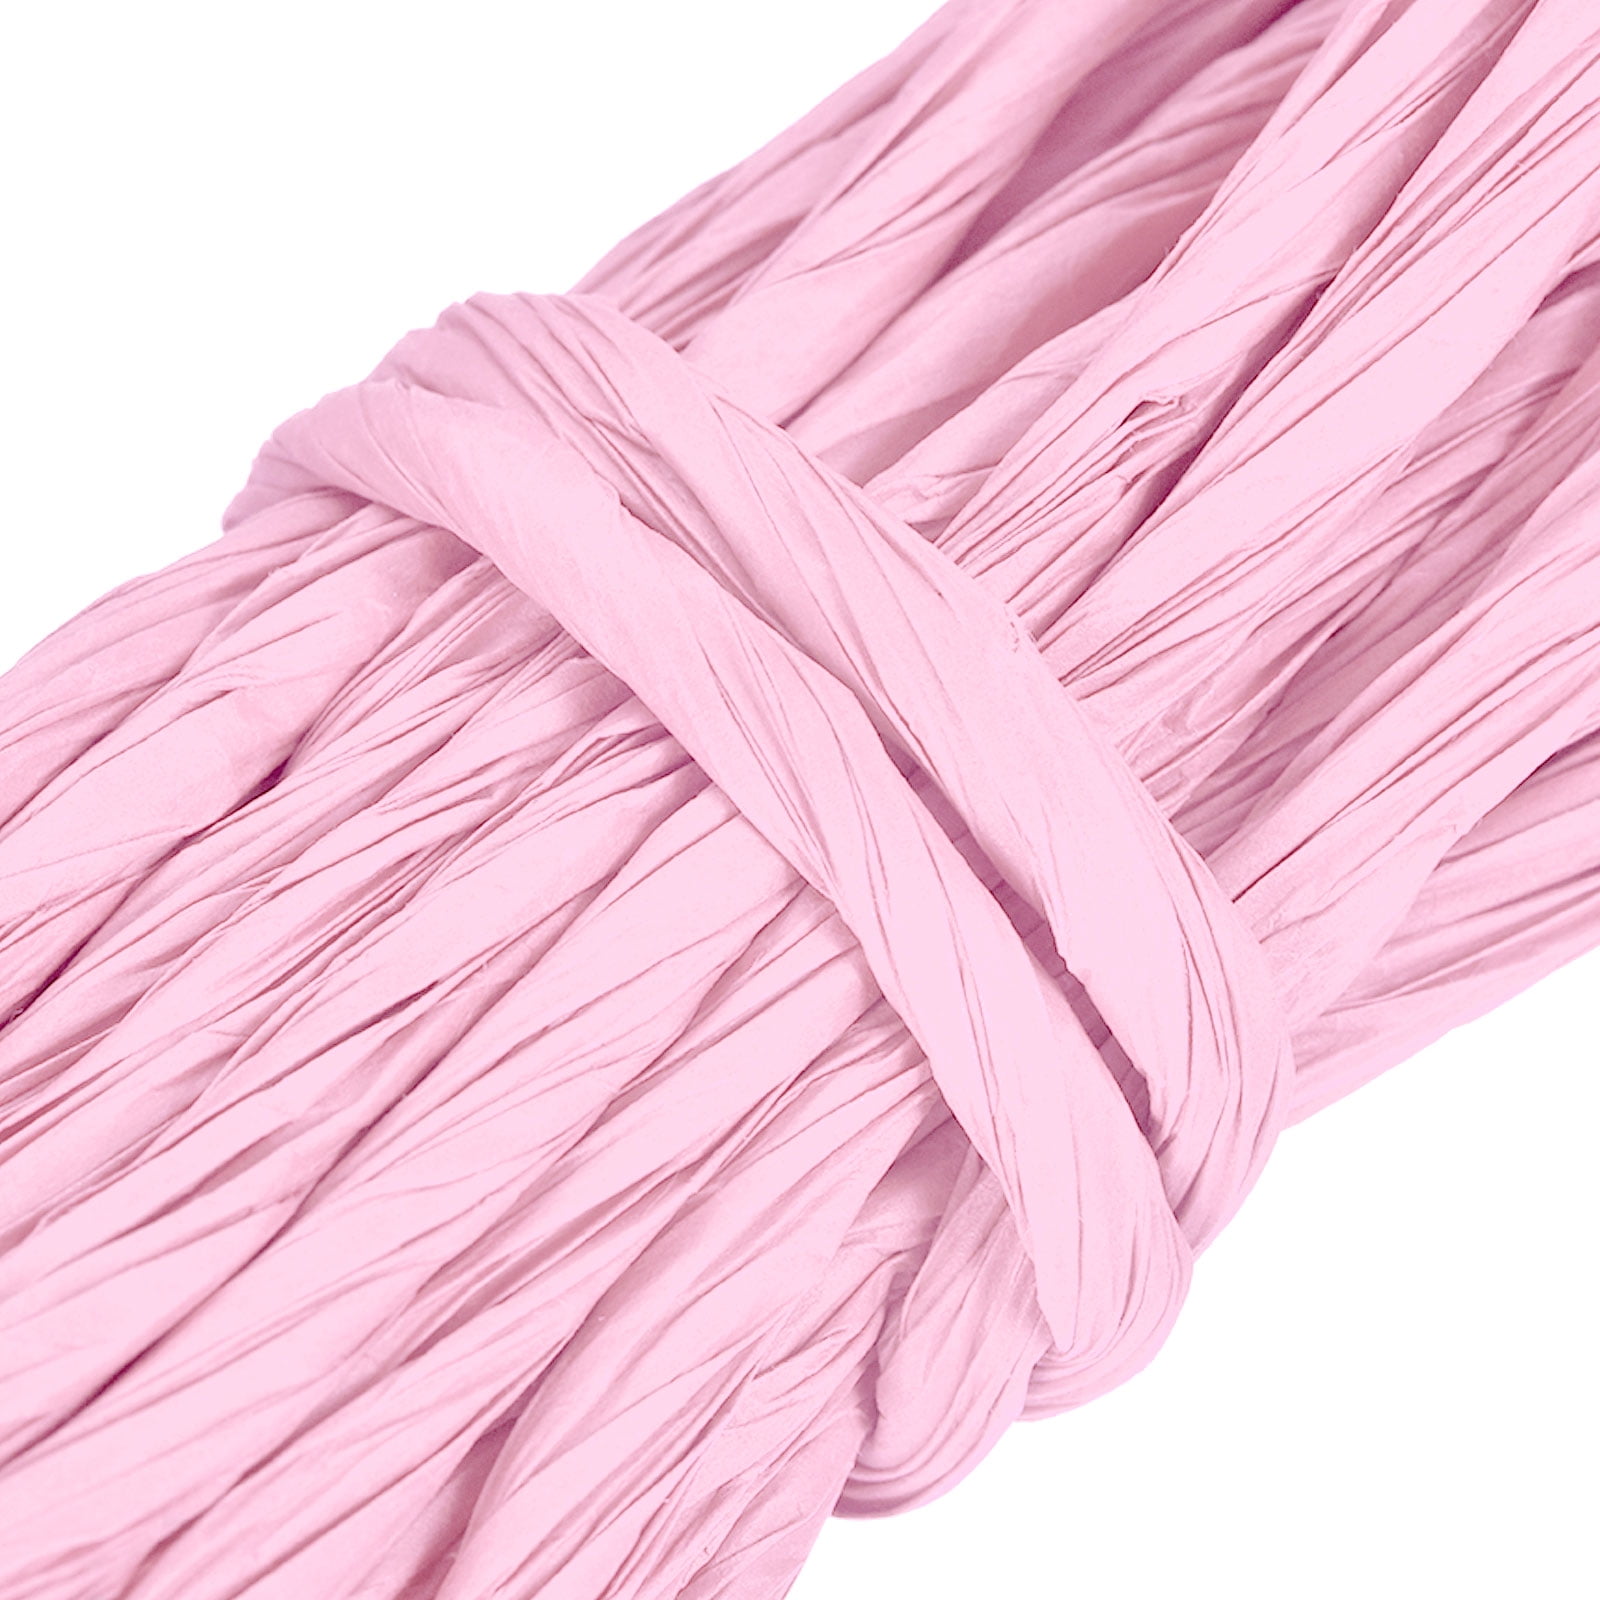 100-Pack of 22 x 35mm Pink Paper Knotted String Price Tags – JPI